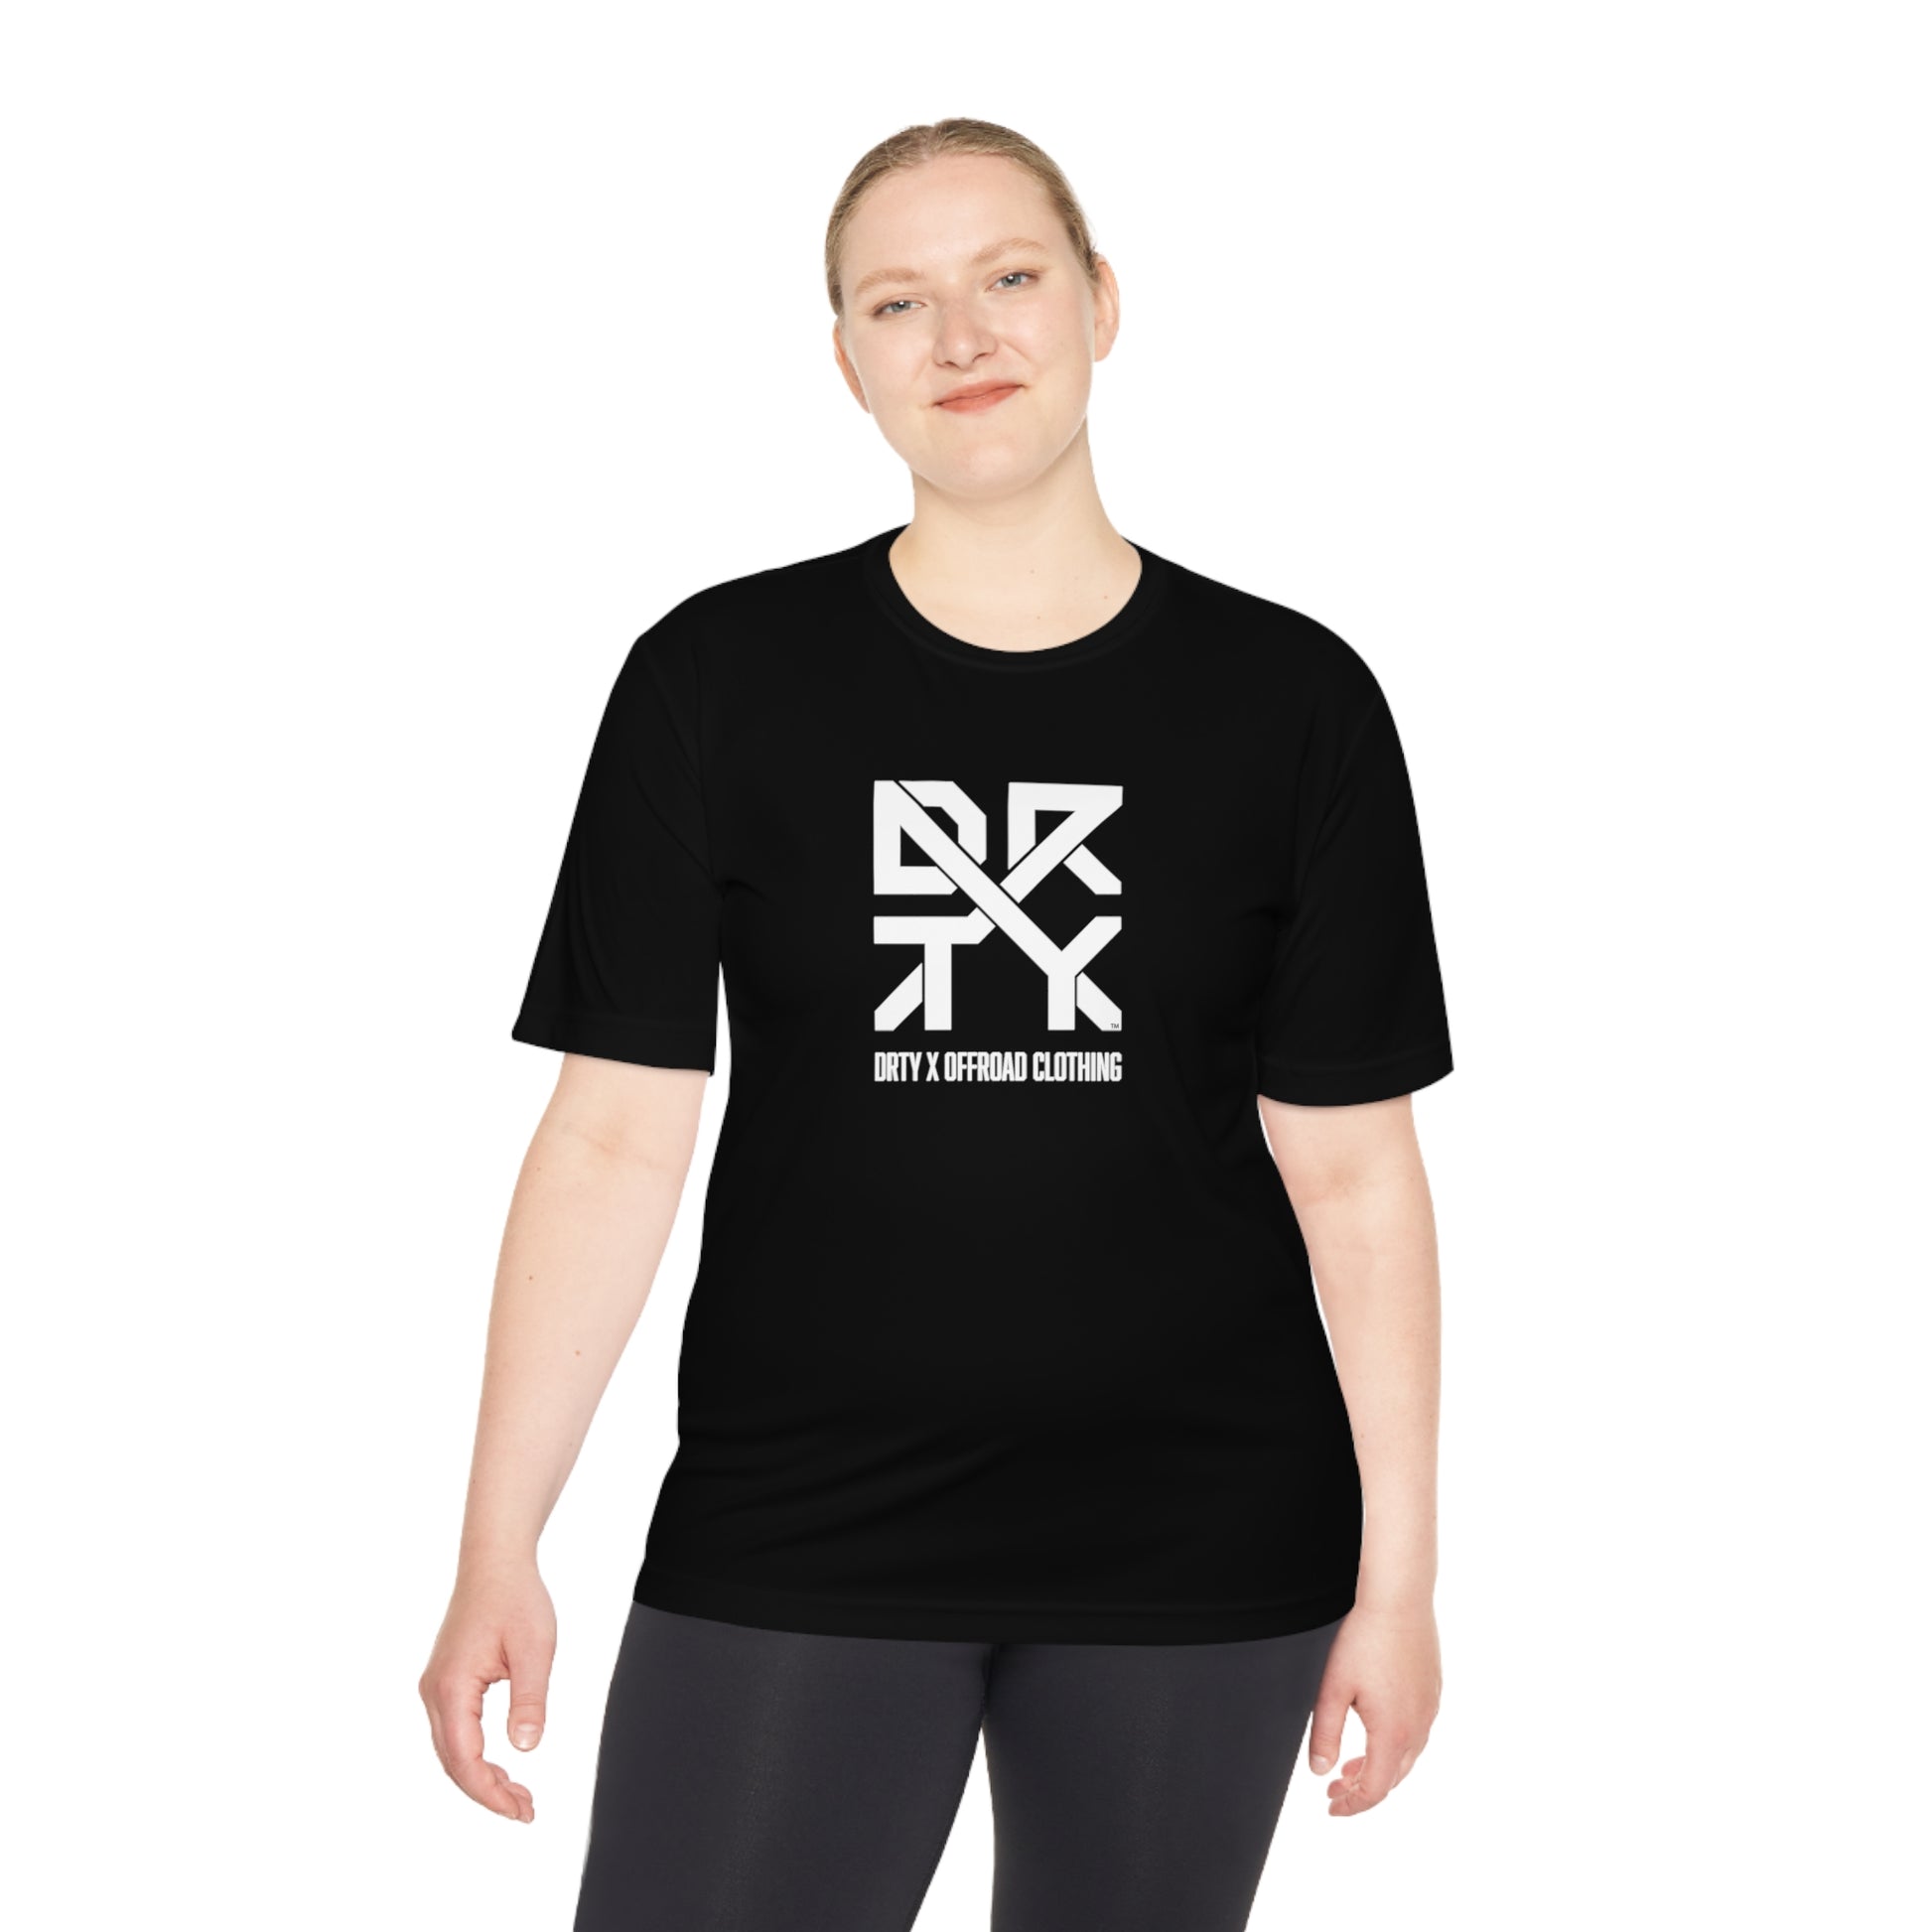 This image showcases the front view of a woman wearing a T-shirt with a large DRTY X Logo on the center of the shirt.